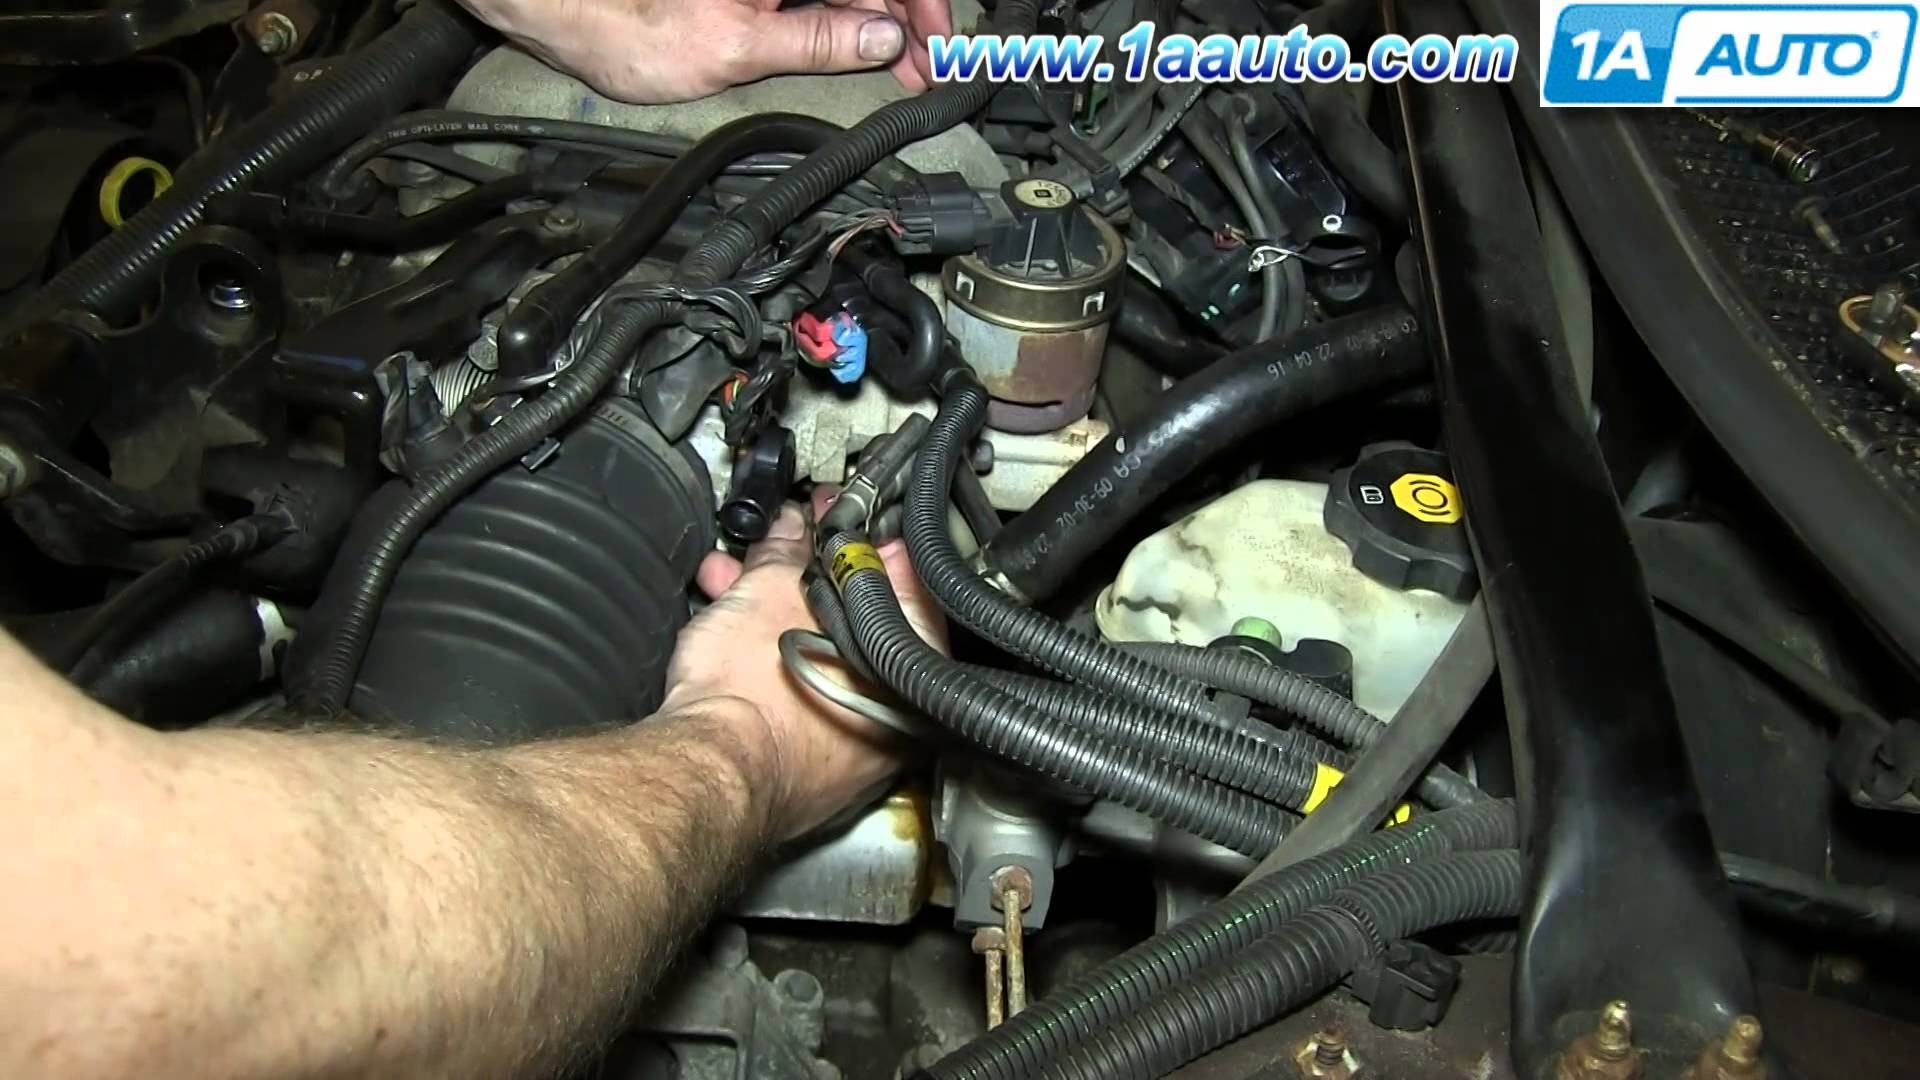 1999 Chevy Lumina Engine Diagram How to Install Replace Tps Throttle Position Sensor 3 4l Chevy Monte Of 1999 Chevy Lumina Engine Diagram